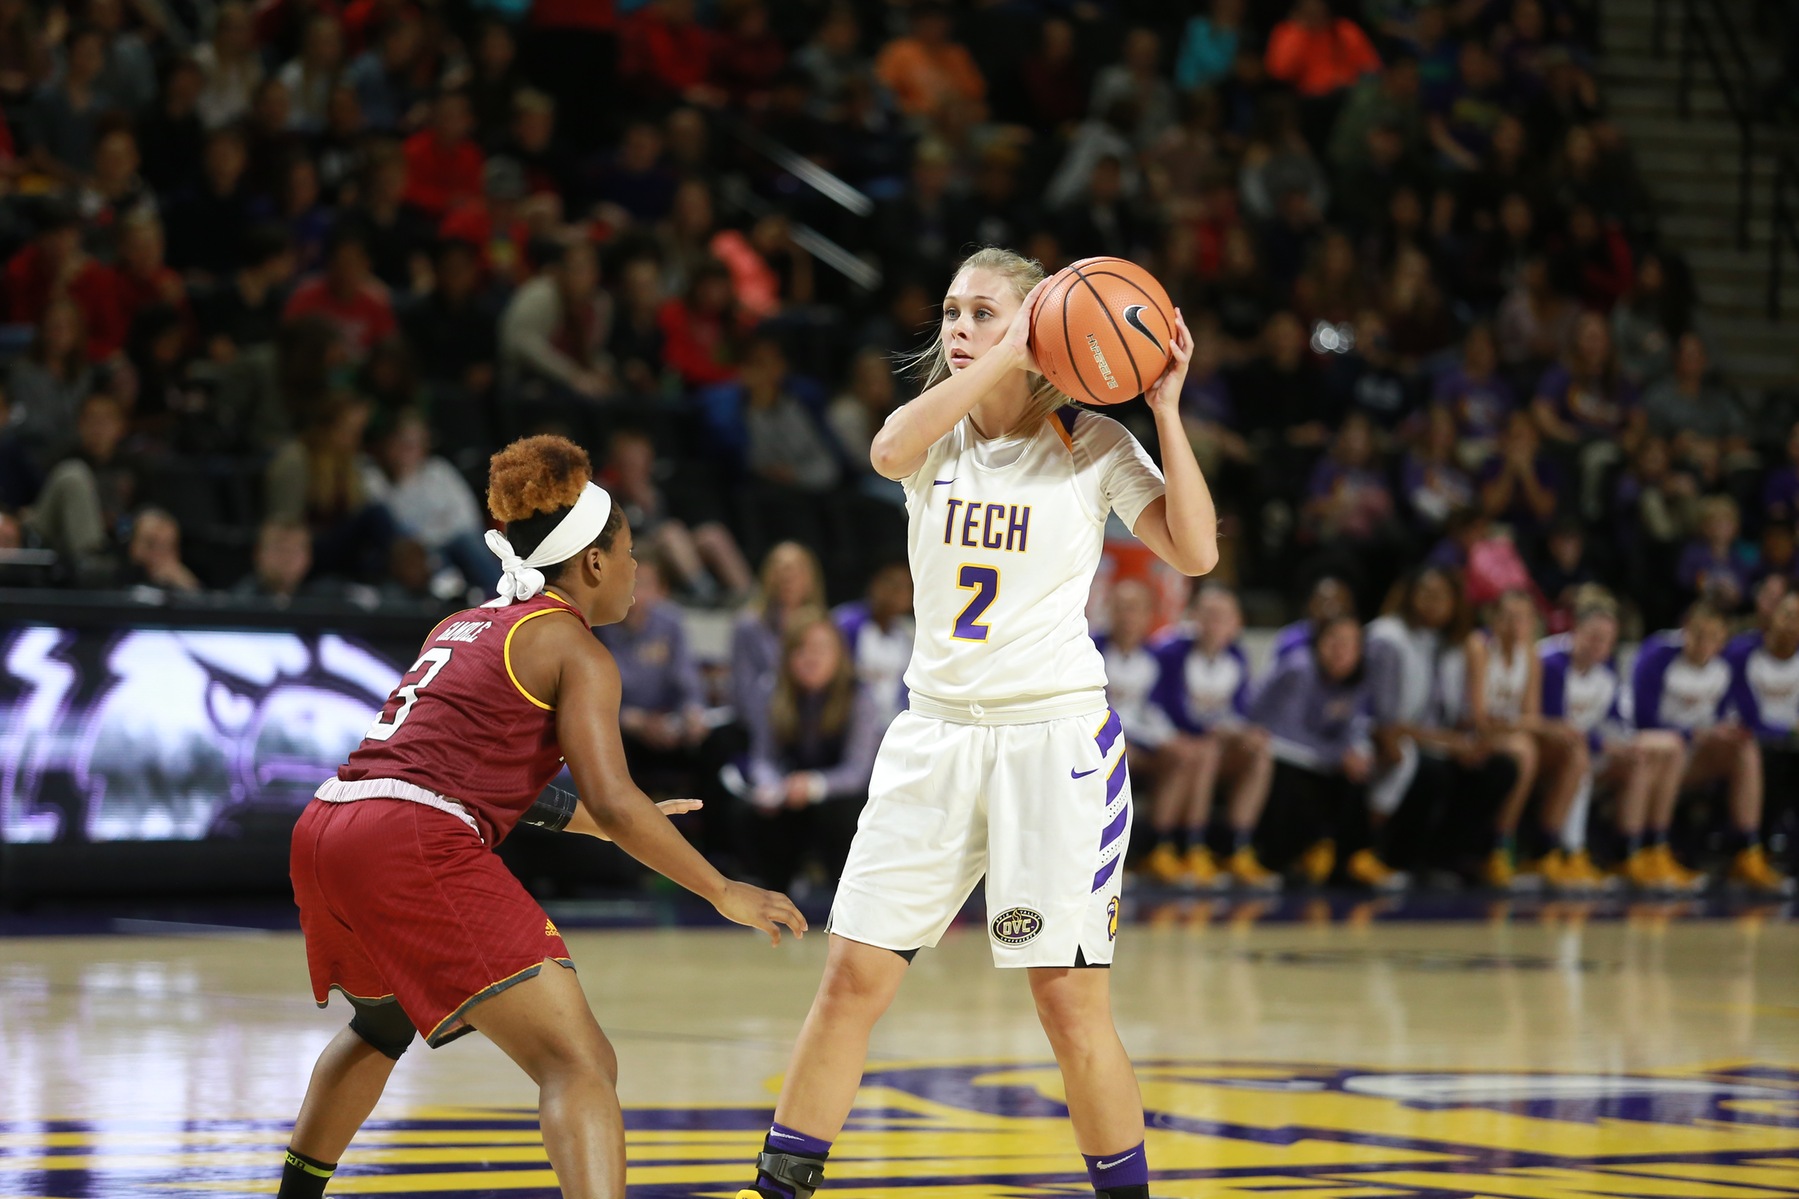 Tech ends lull with improved win over Winthrop